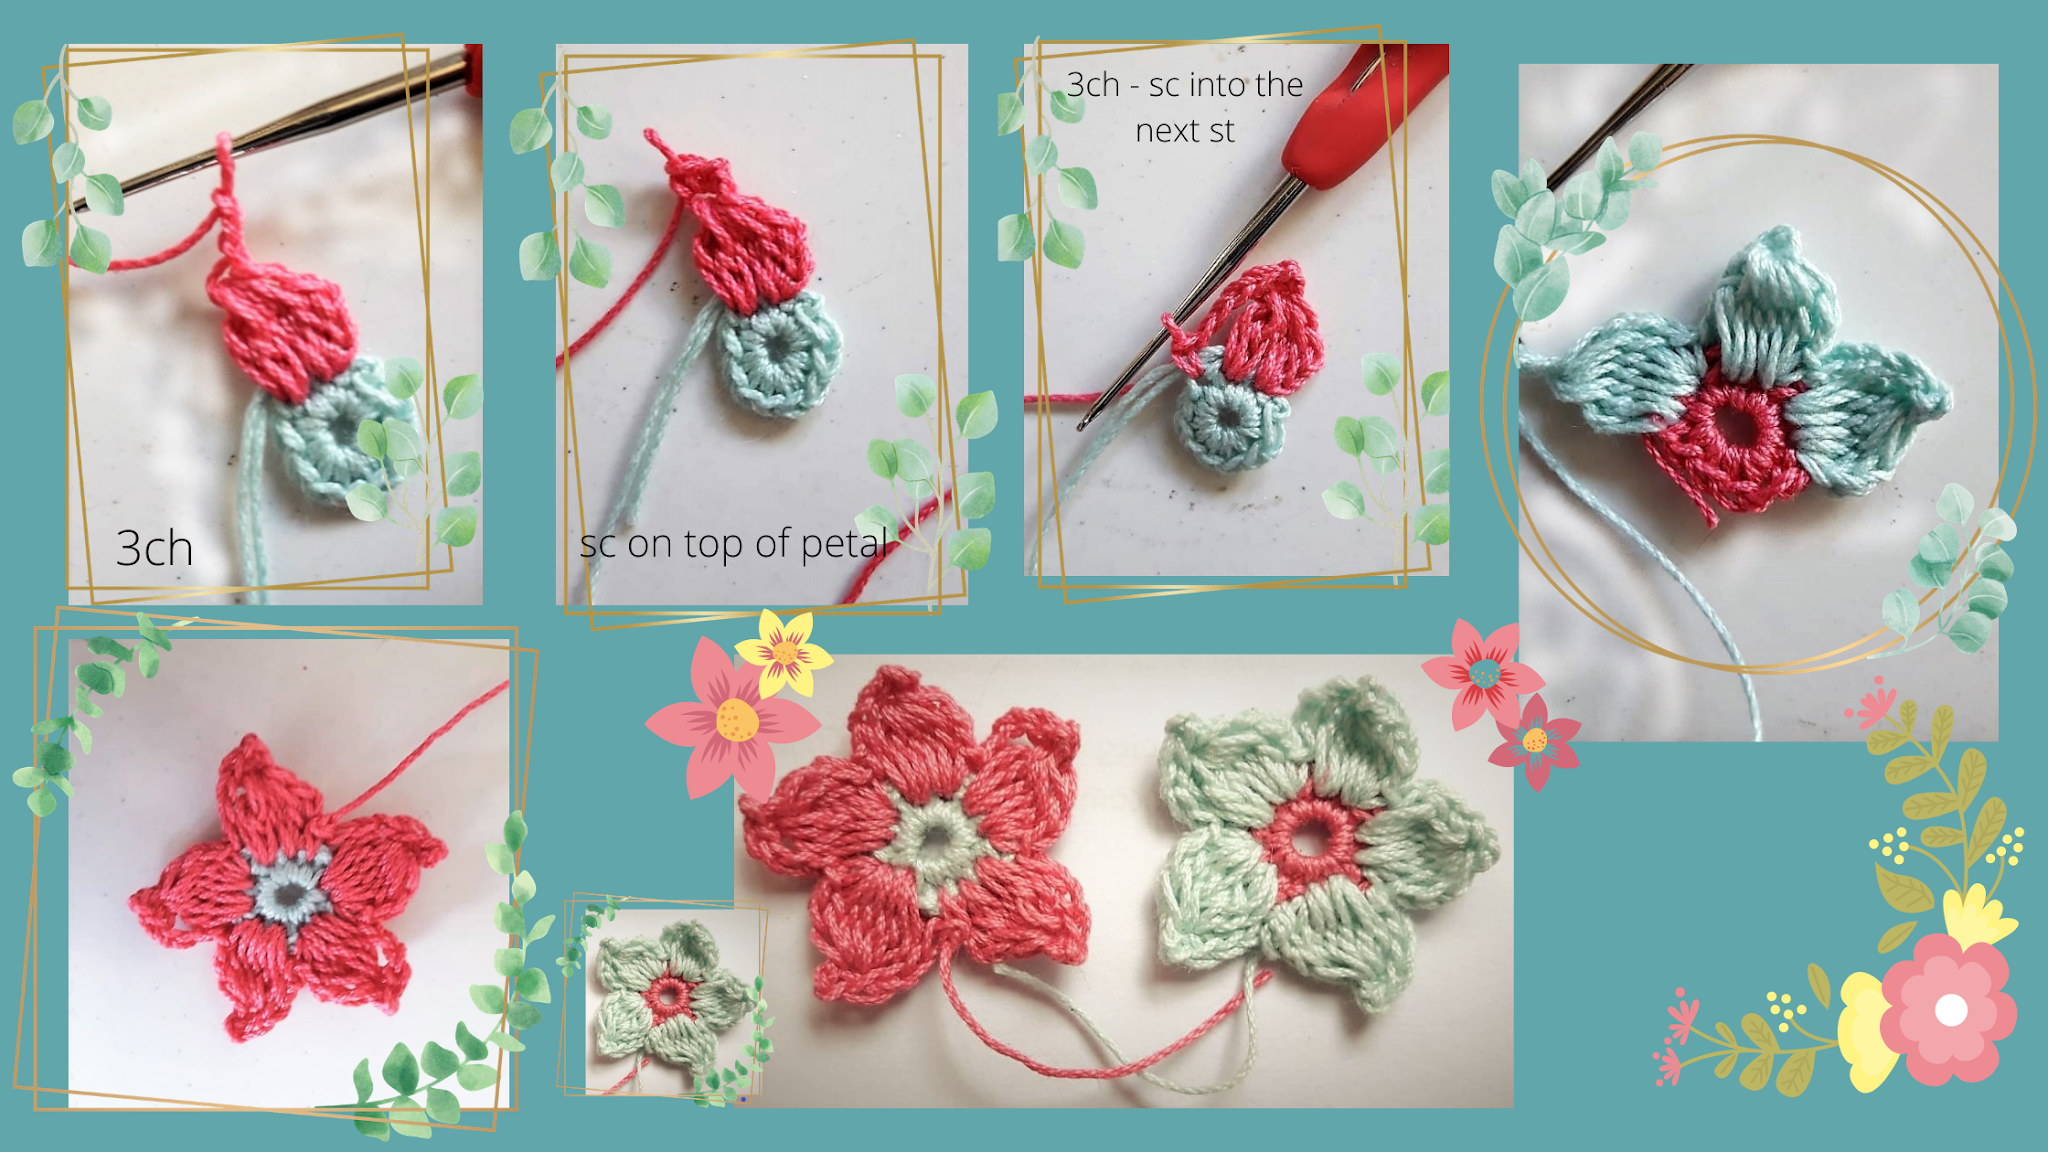 Flor a ganchillo paso a paso - crochet flower step by step